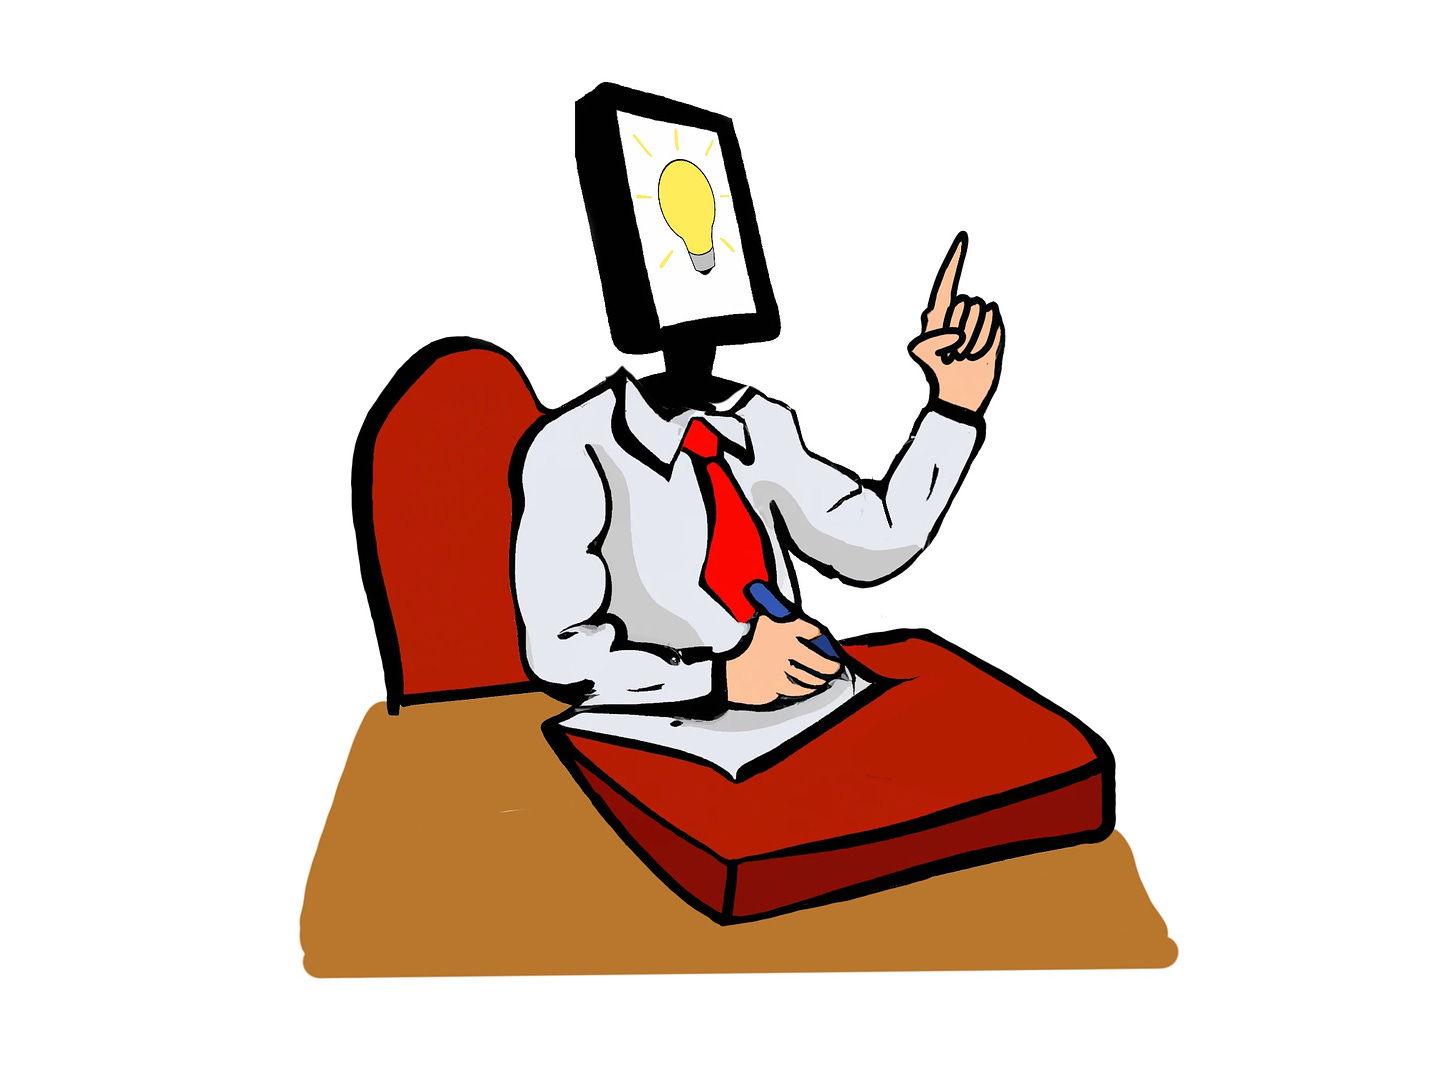 A cartoon drawing of a person with a computer monitor for a head. The person has sat down to write on paper.